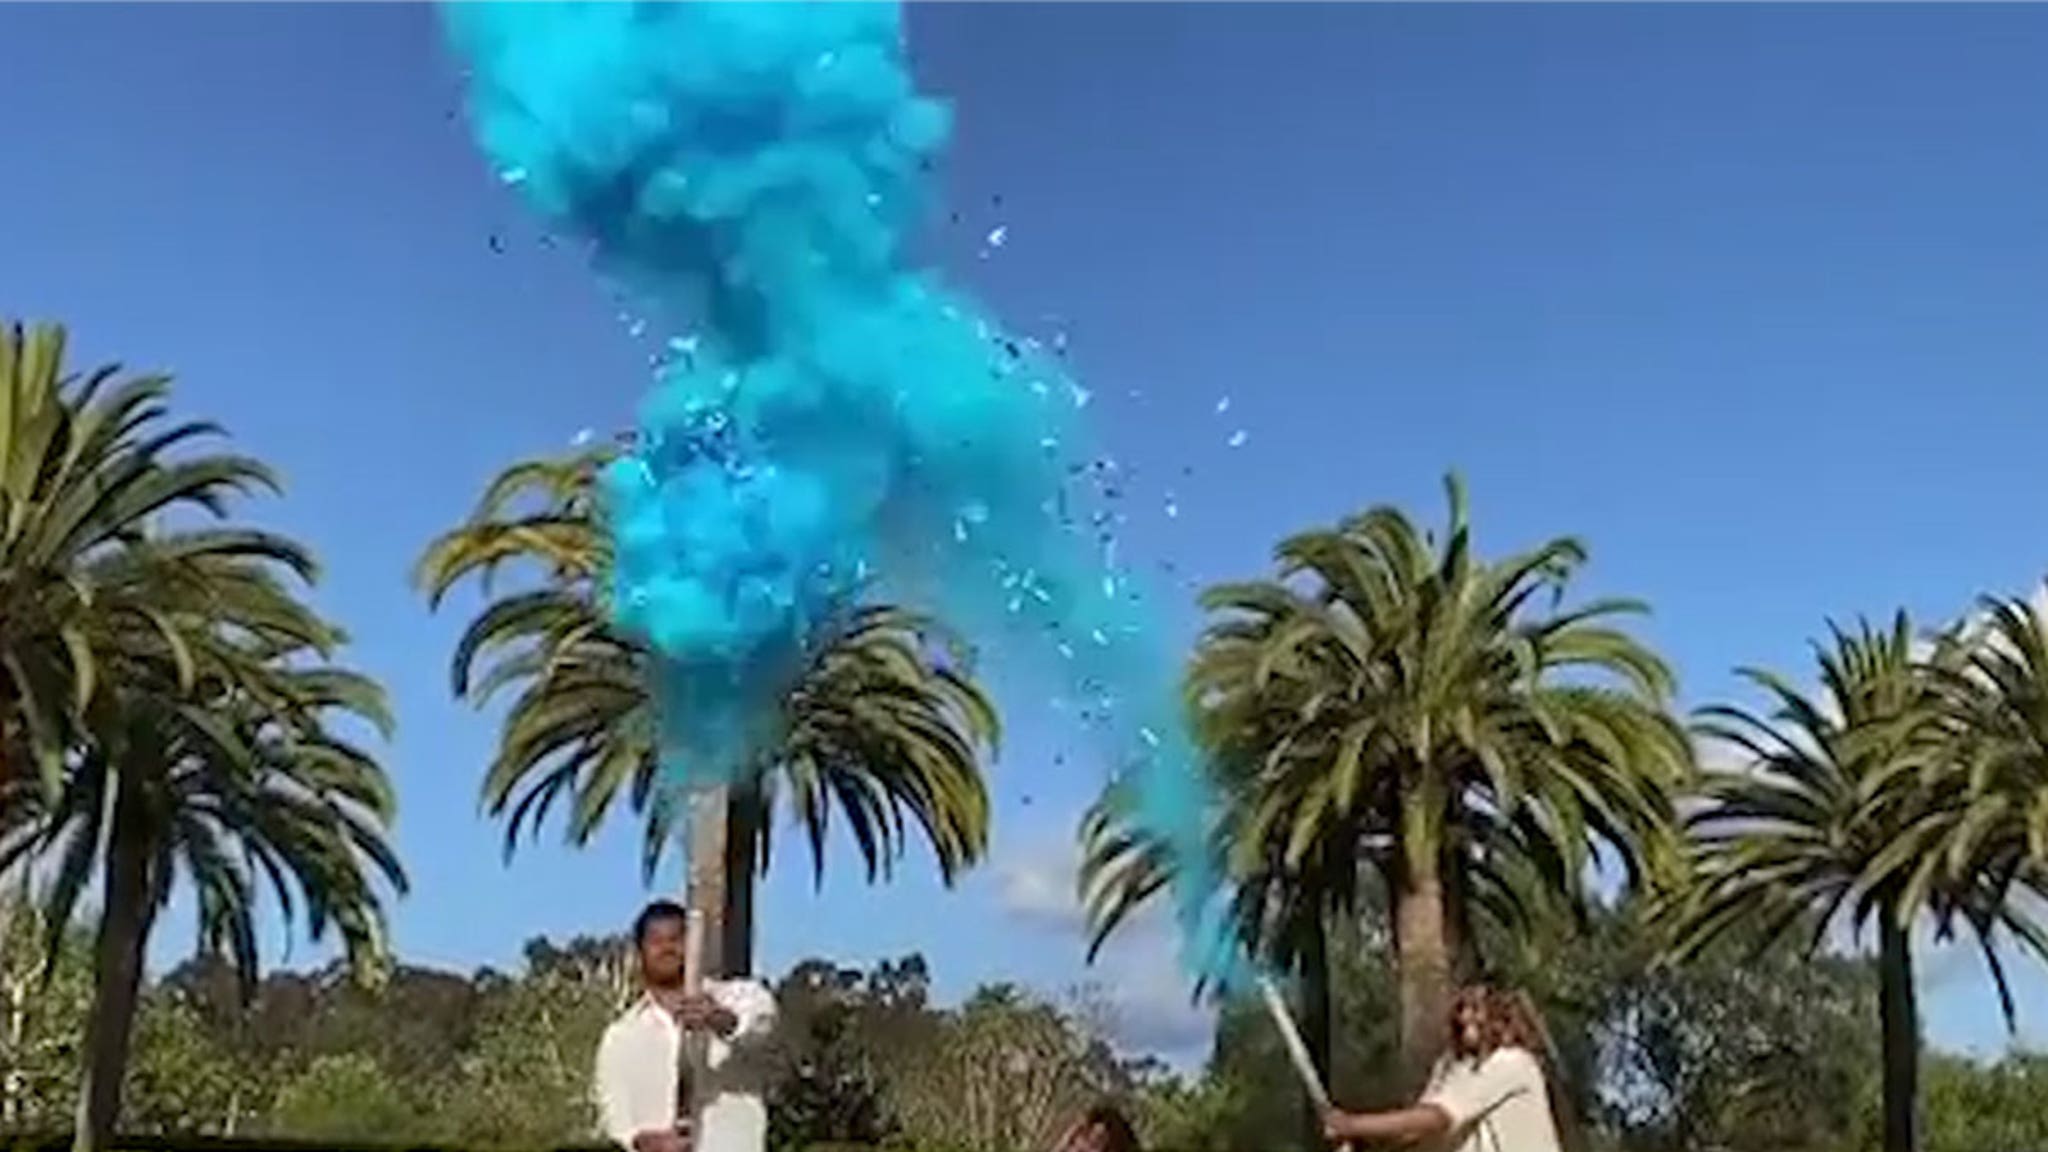 Russell Wilson & Ciara Have Dance Party After Baby Gender Reveal, It's A Boy!